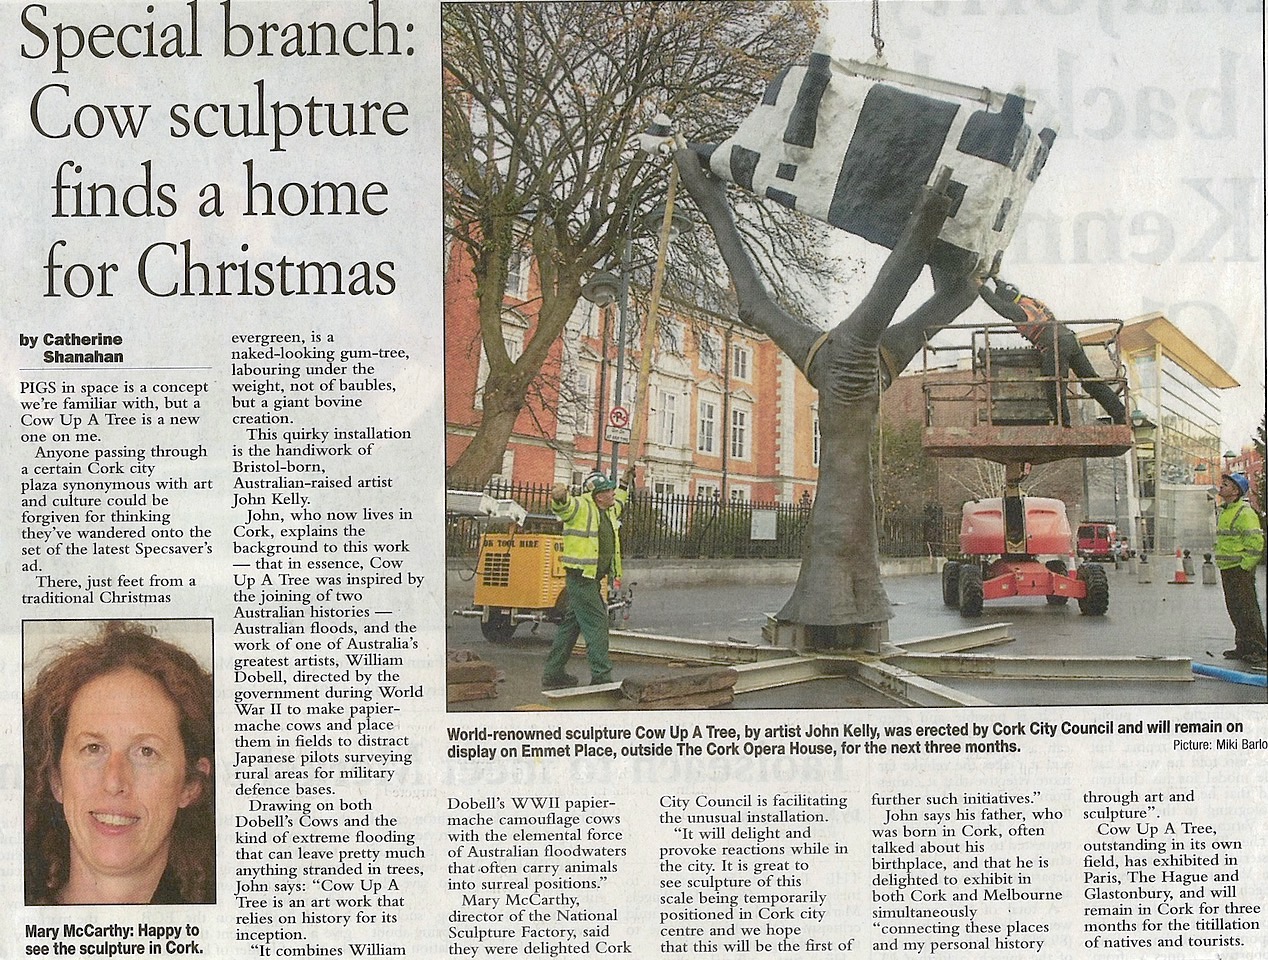 Catherine Shanahan, ‘Special ranch: Cow sculpture finds a home from Christmas’; newspaper article with an image of Cow up a Tree being placed outside the Crawford Art Gallery in Cork, plus a portrait photo of Mary McCarthy, director of the National Sculpture Factory